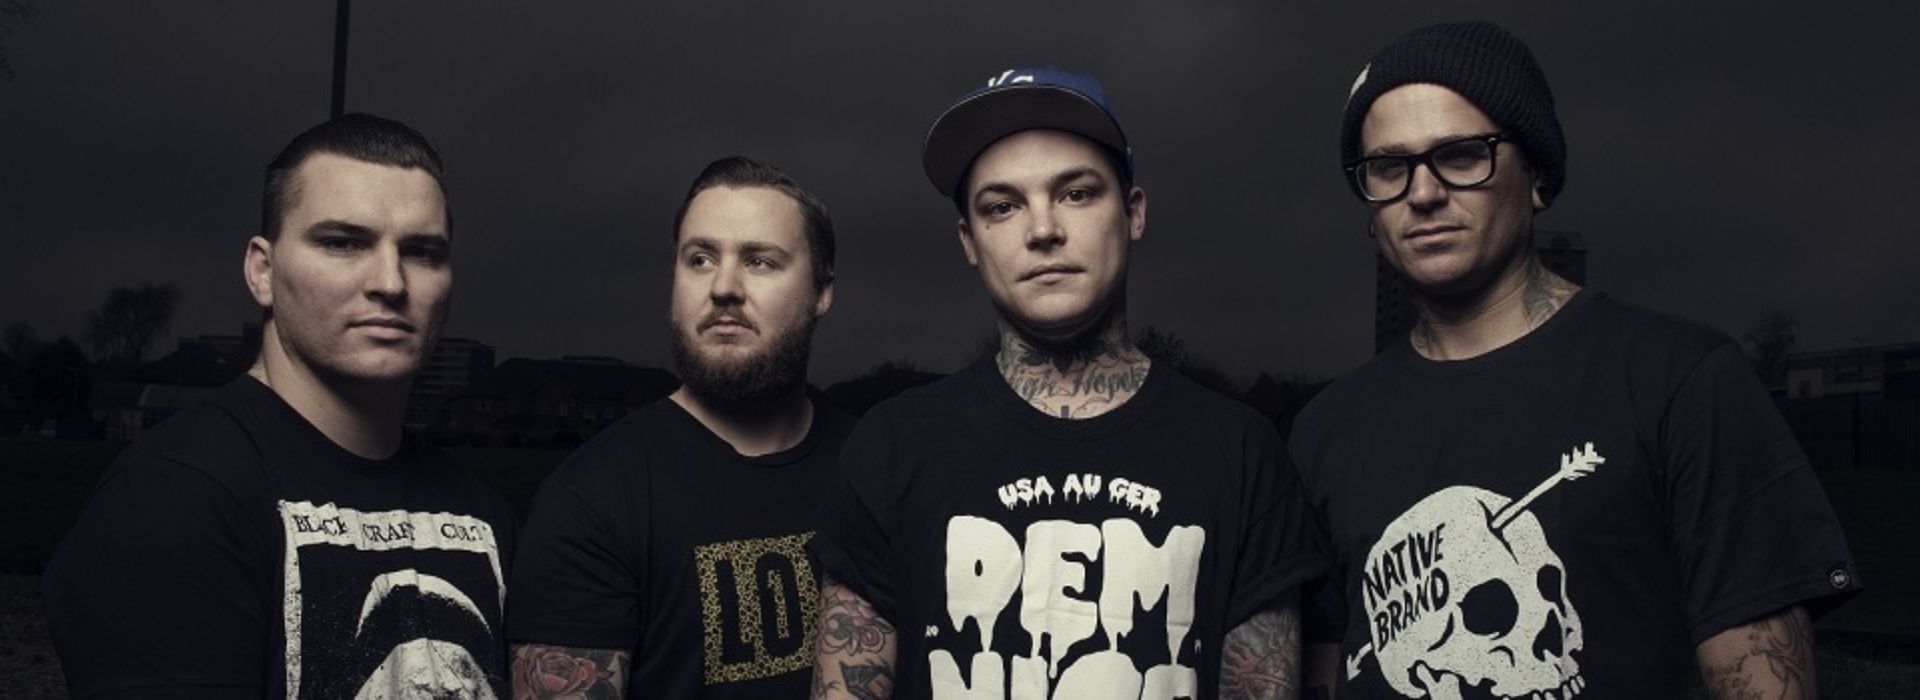 The Amity Affliction Shop Banner 1